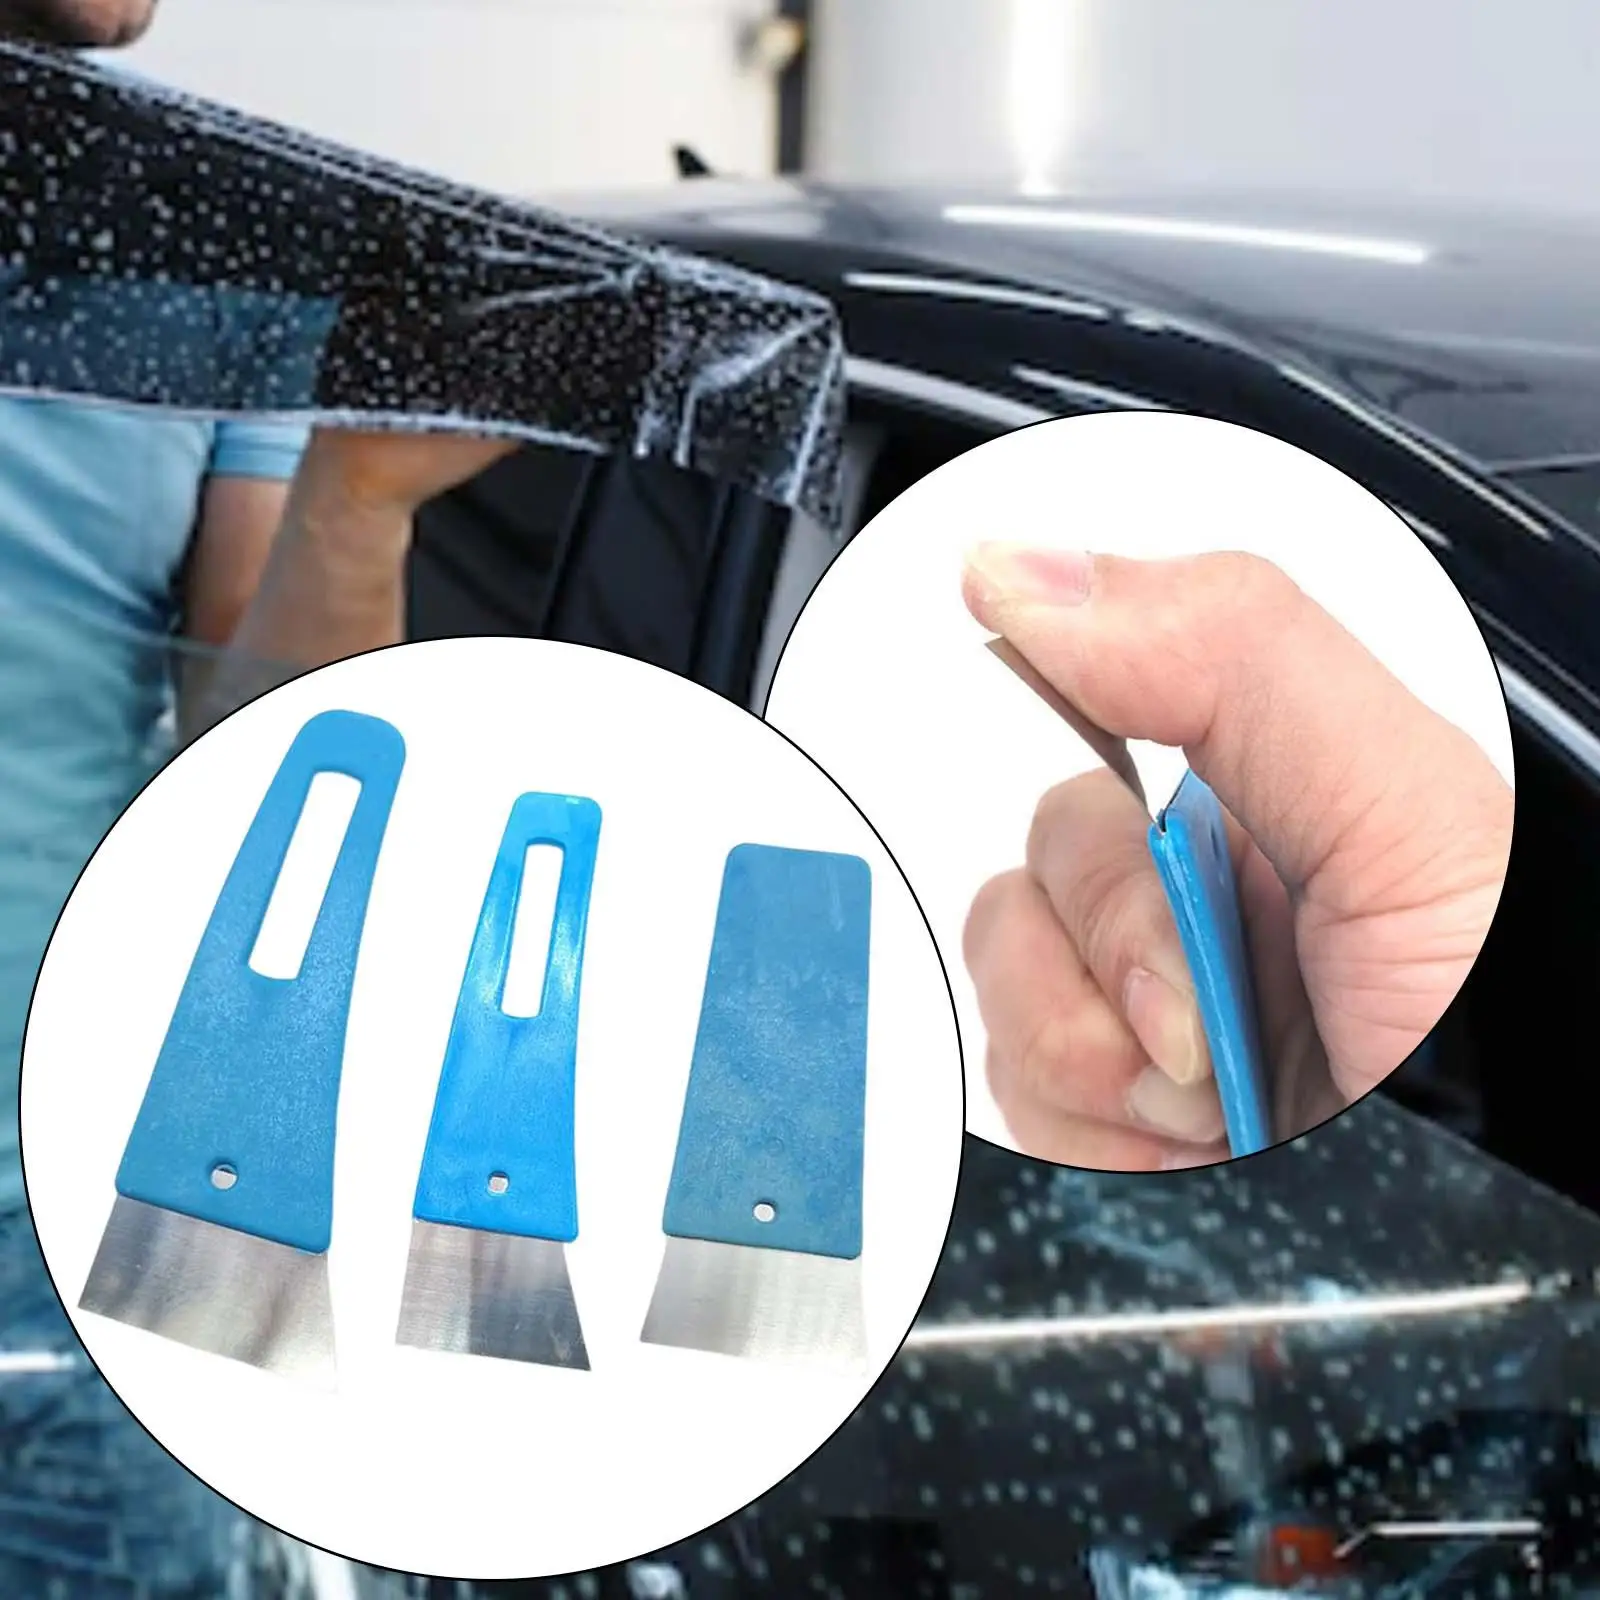 Set of 3Pcs Car Window Film Scraper Squeegee Set Universal for Paint Protection Film